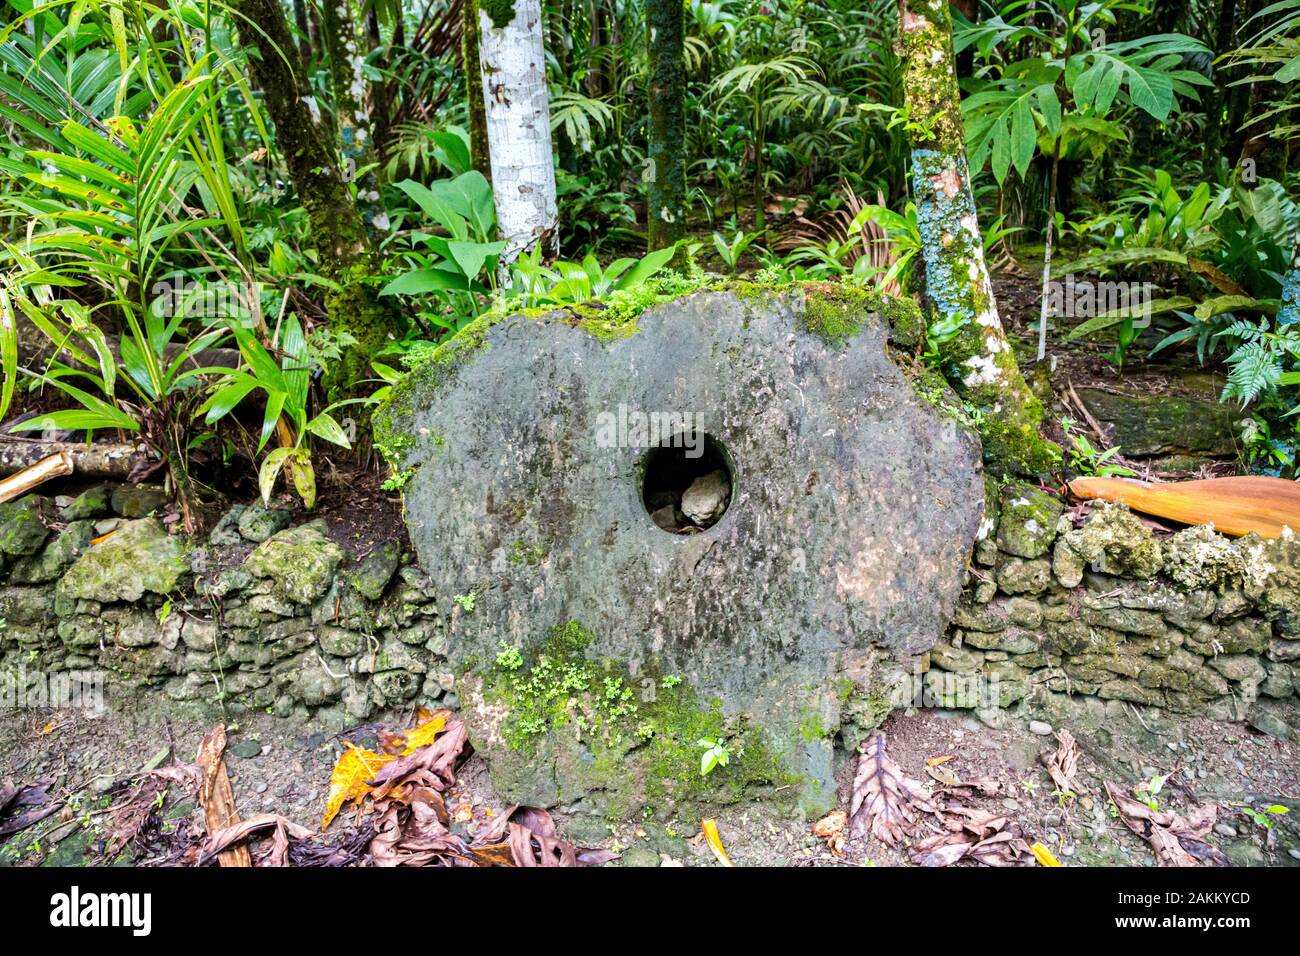 A giant prehistoric megalithic stone coin or money Rai, under trees overgrown in jungle. Yap island, Federated States of Micronesia, Oceania, South Pa Stock Photo